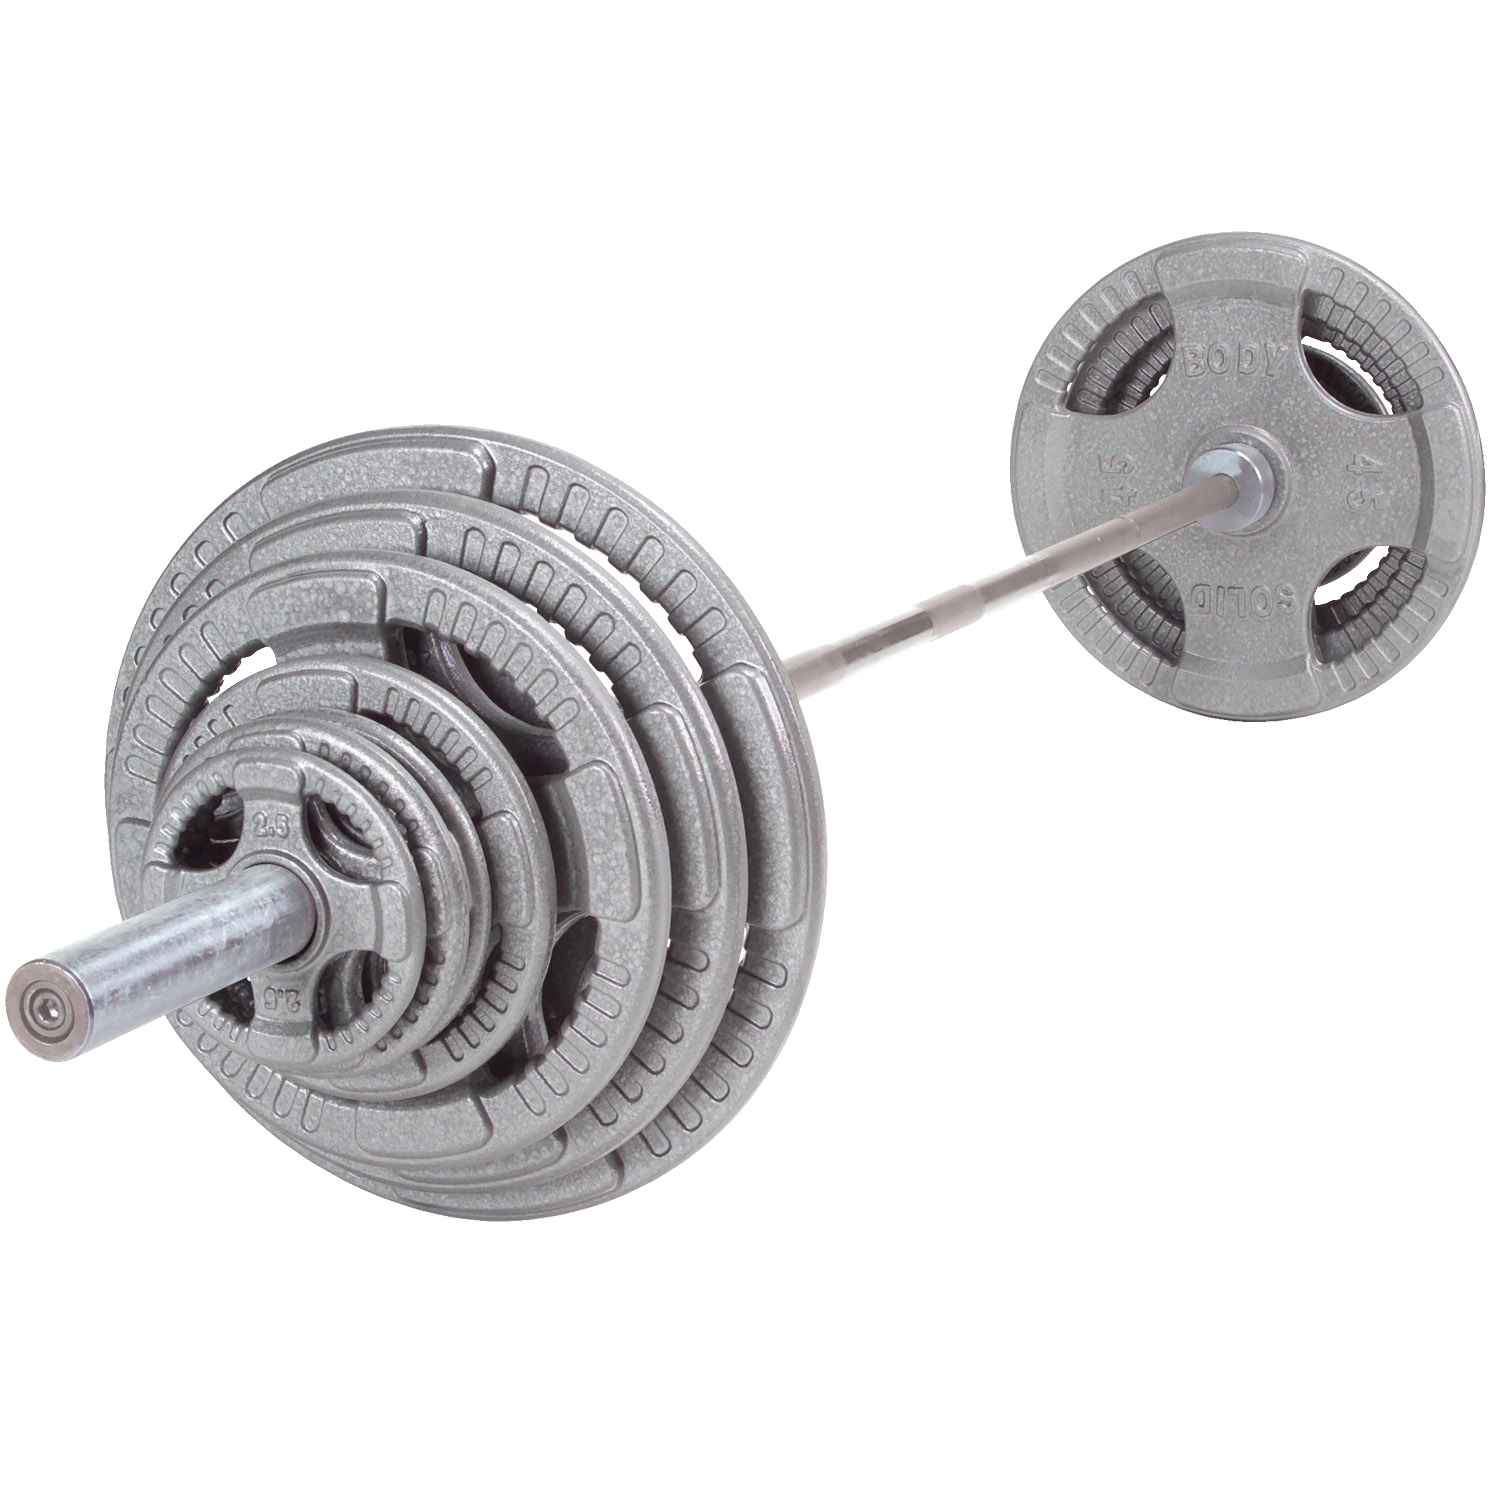 Body-Solid Steel Grip Olympic Plate Set plate Body-Solid Iron 